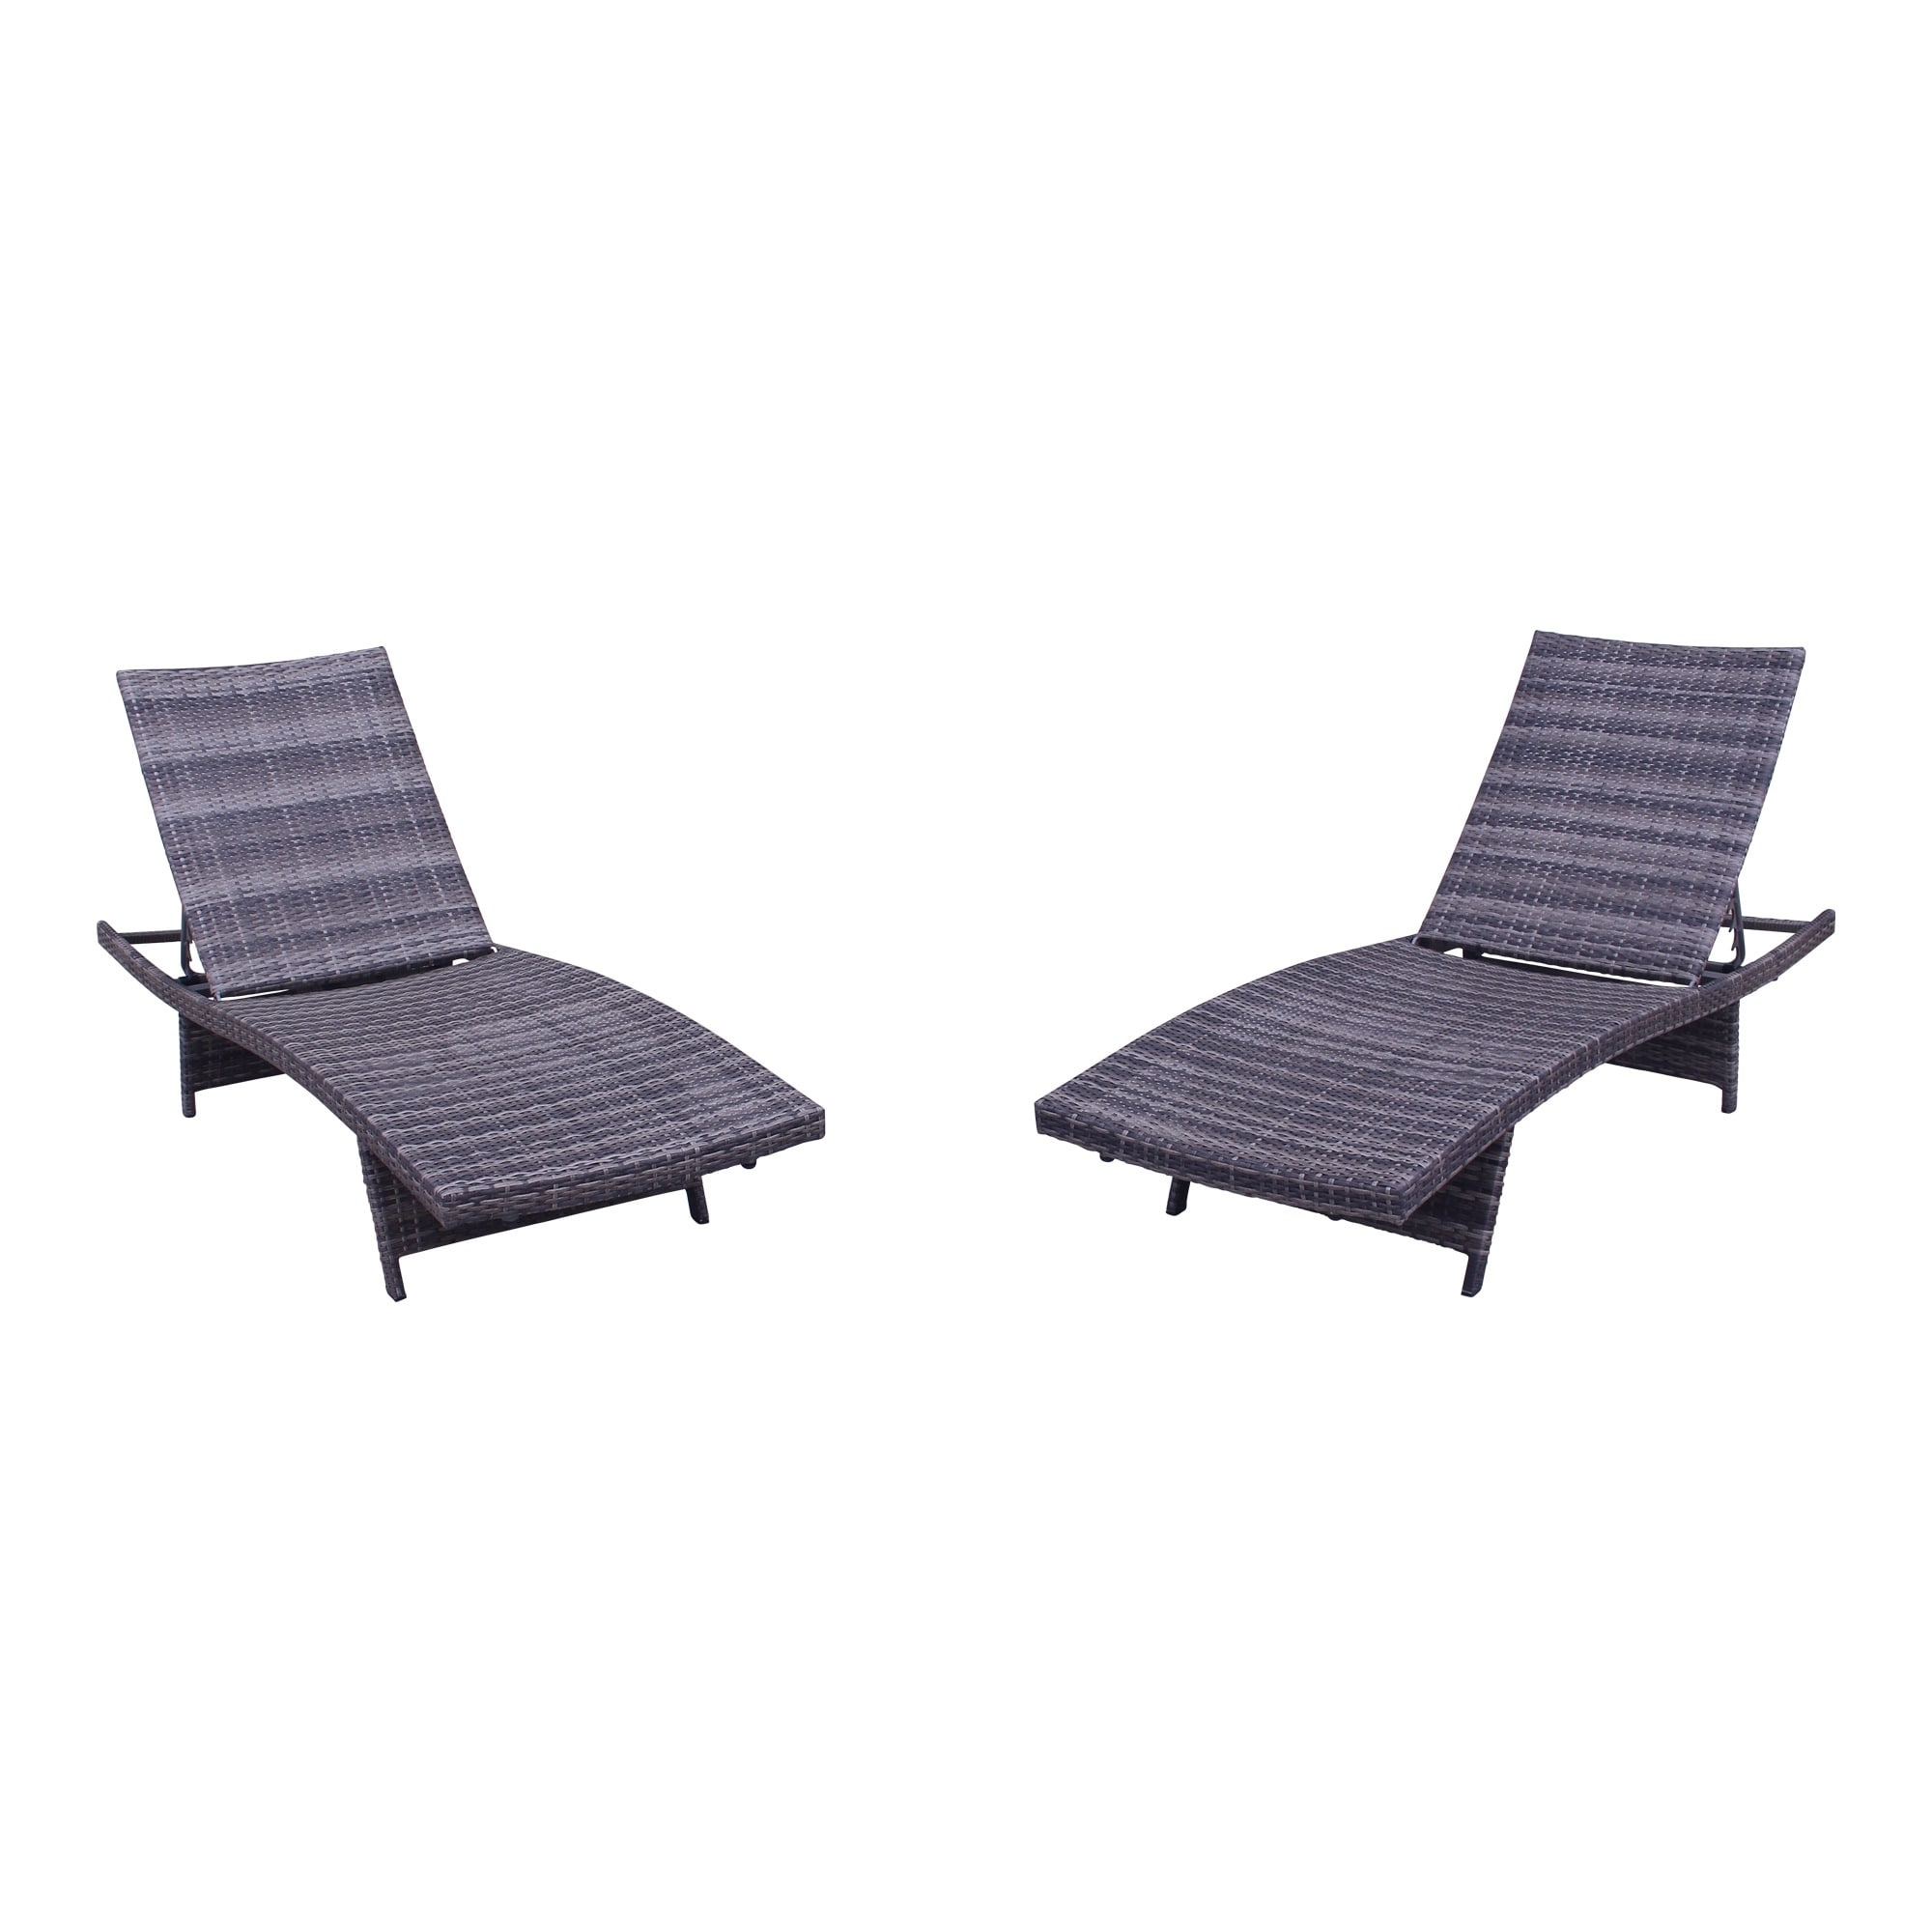 Courtyard Casual Relax 2 Wicker Chaise Lounges With Folding Legs